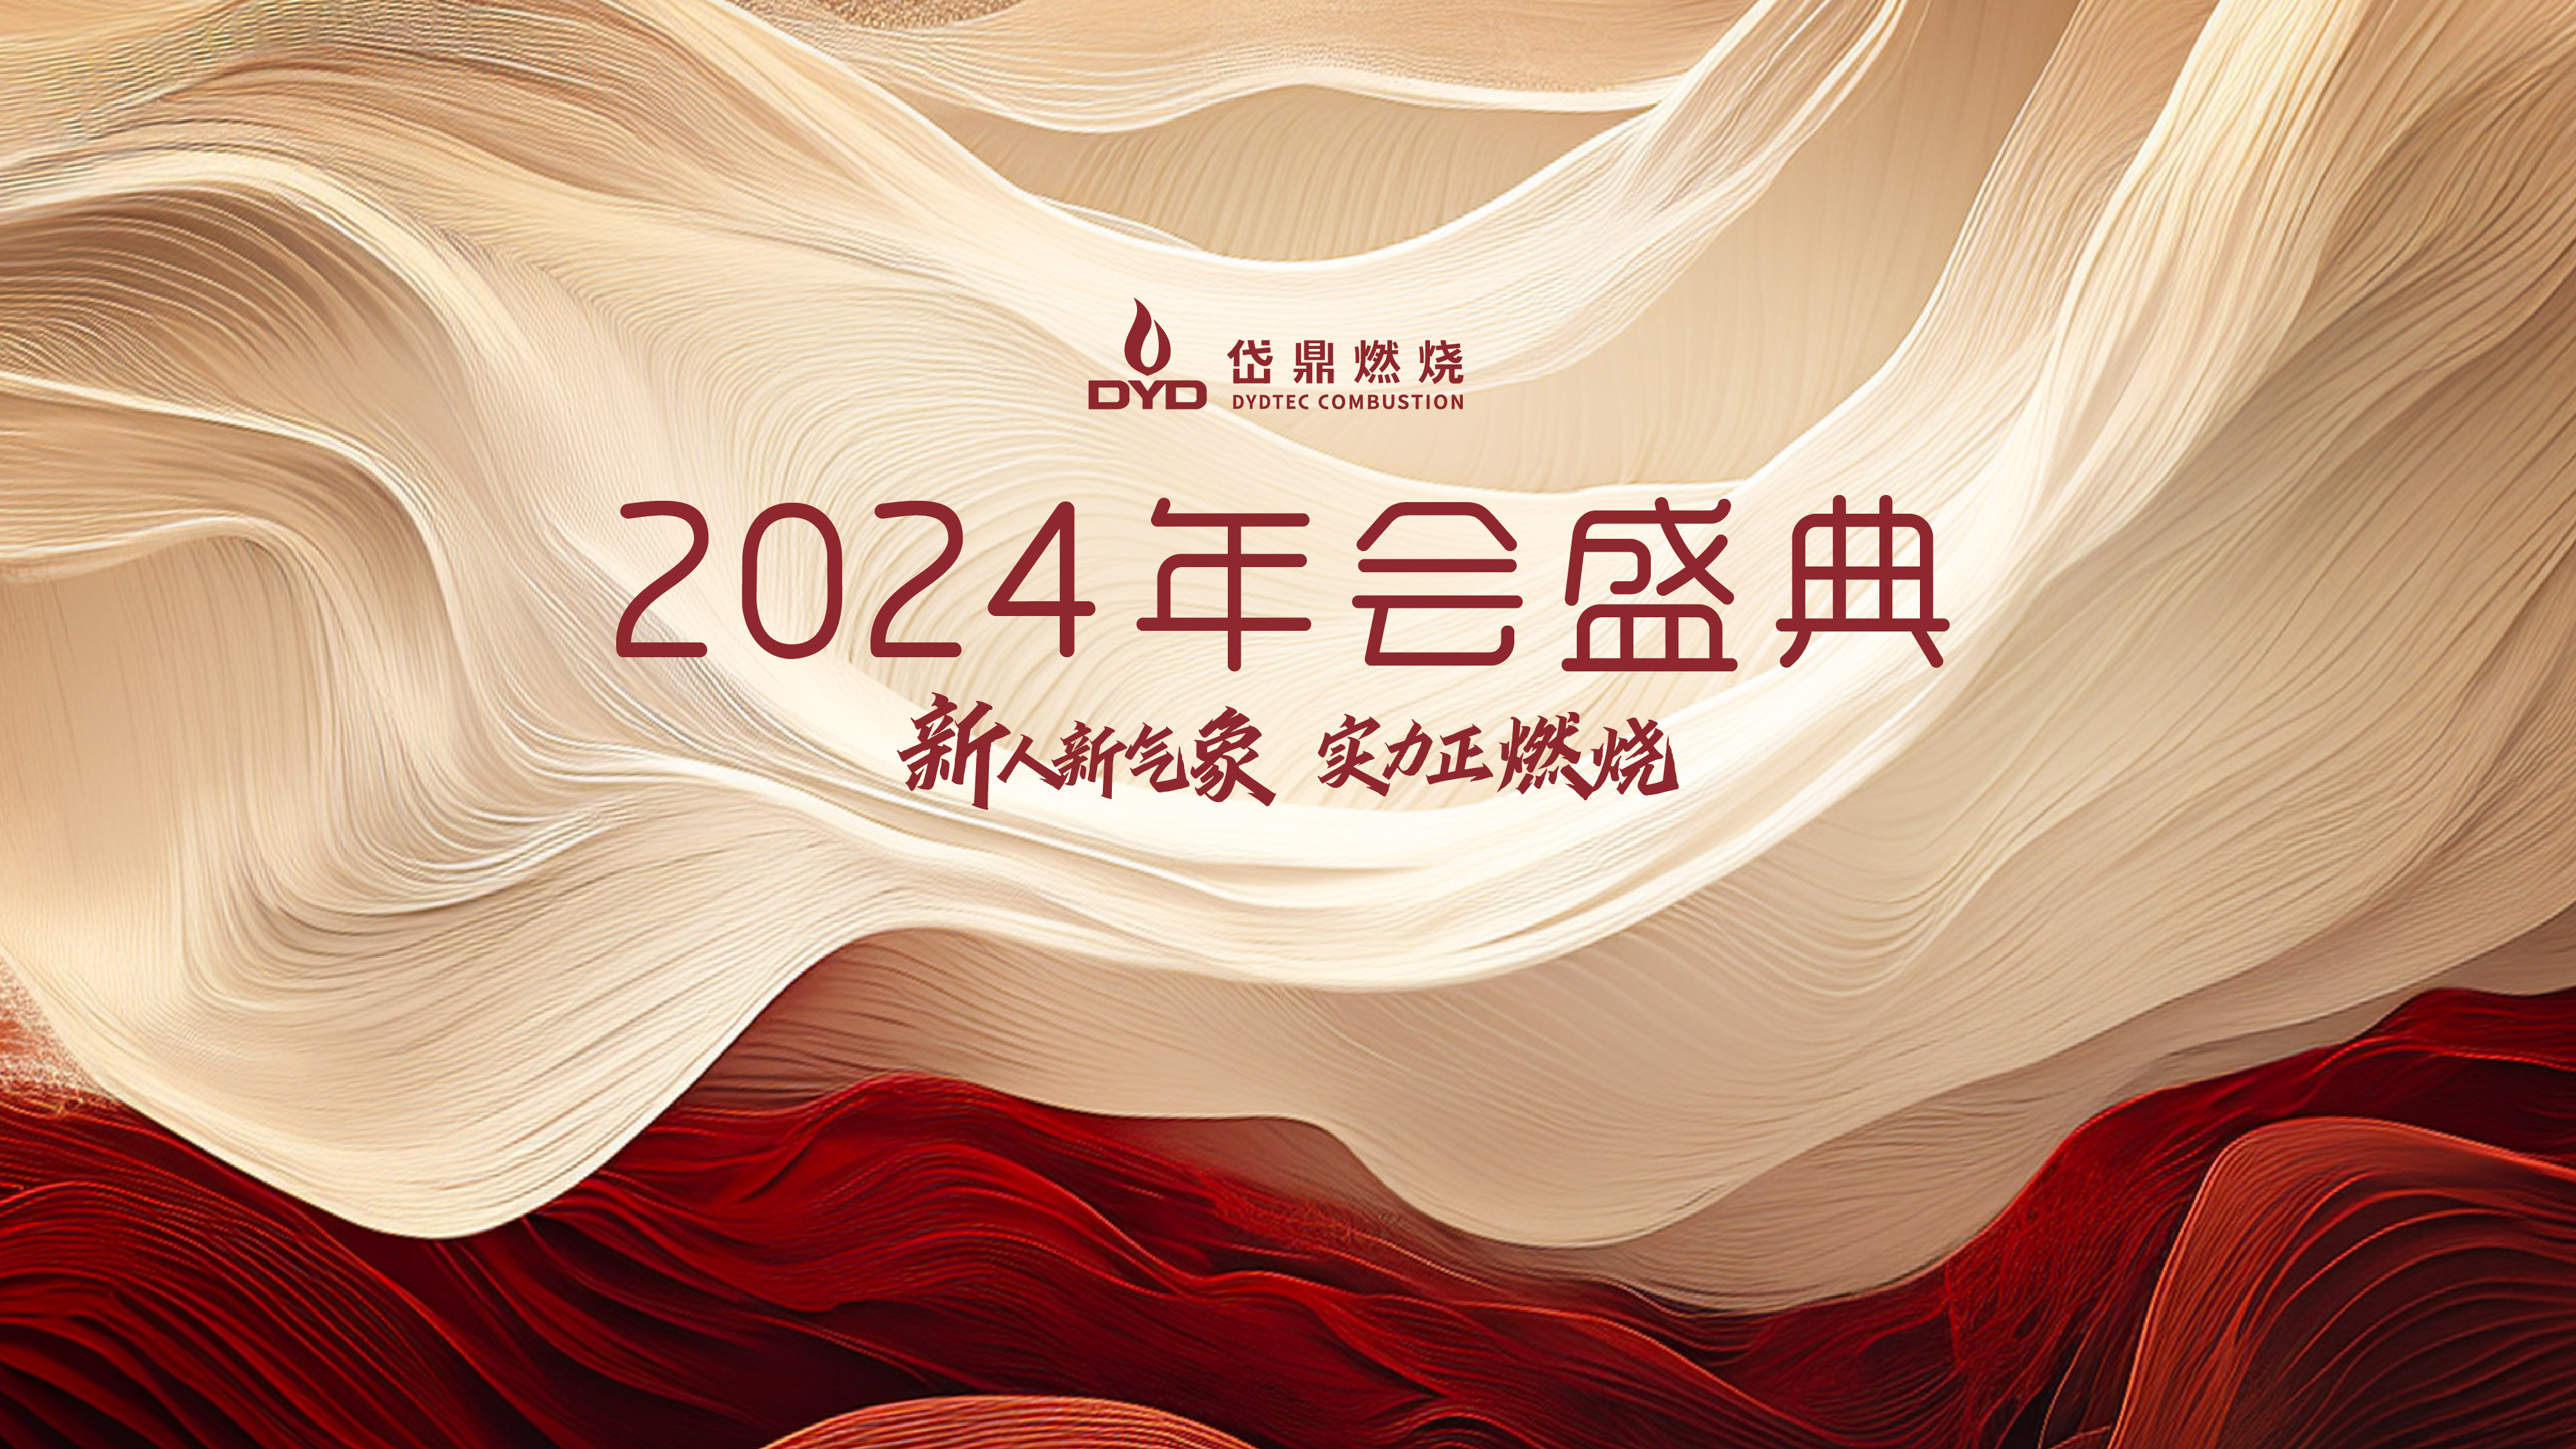 2023 annual meeting of Dydtec Combustion Company